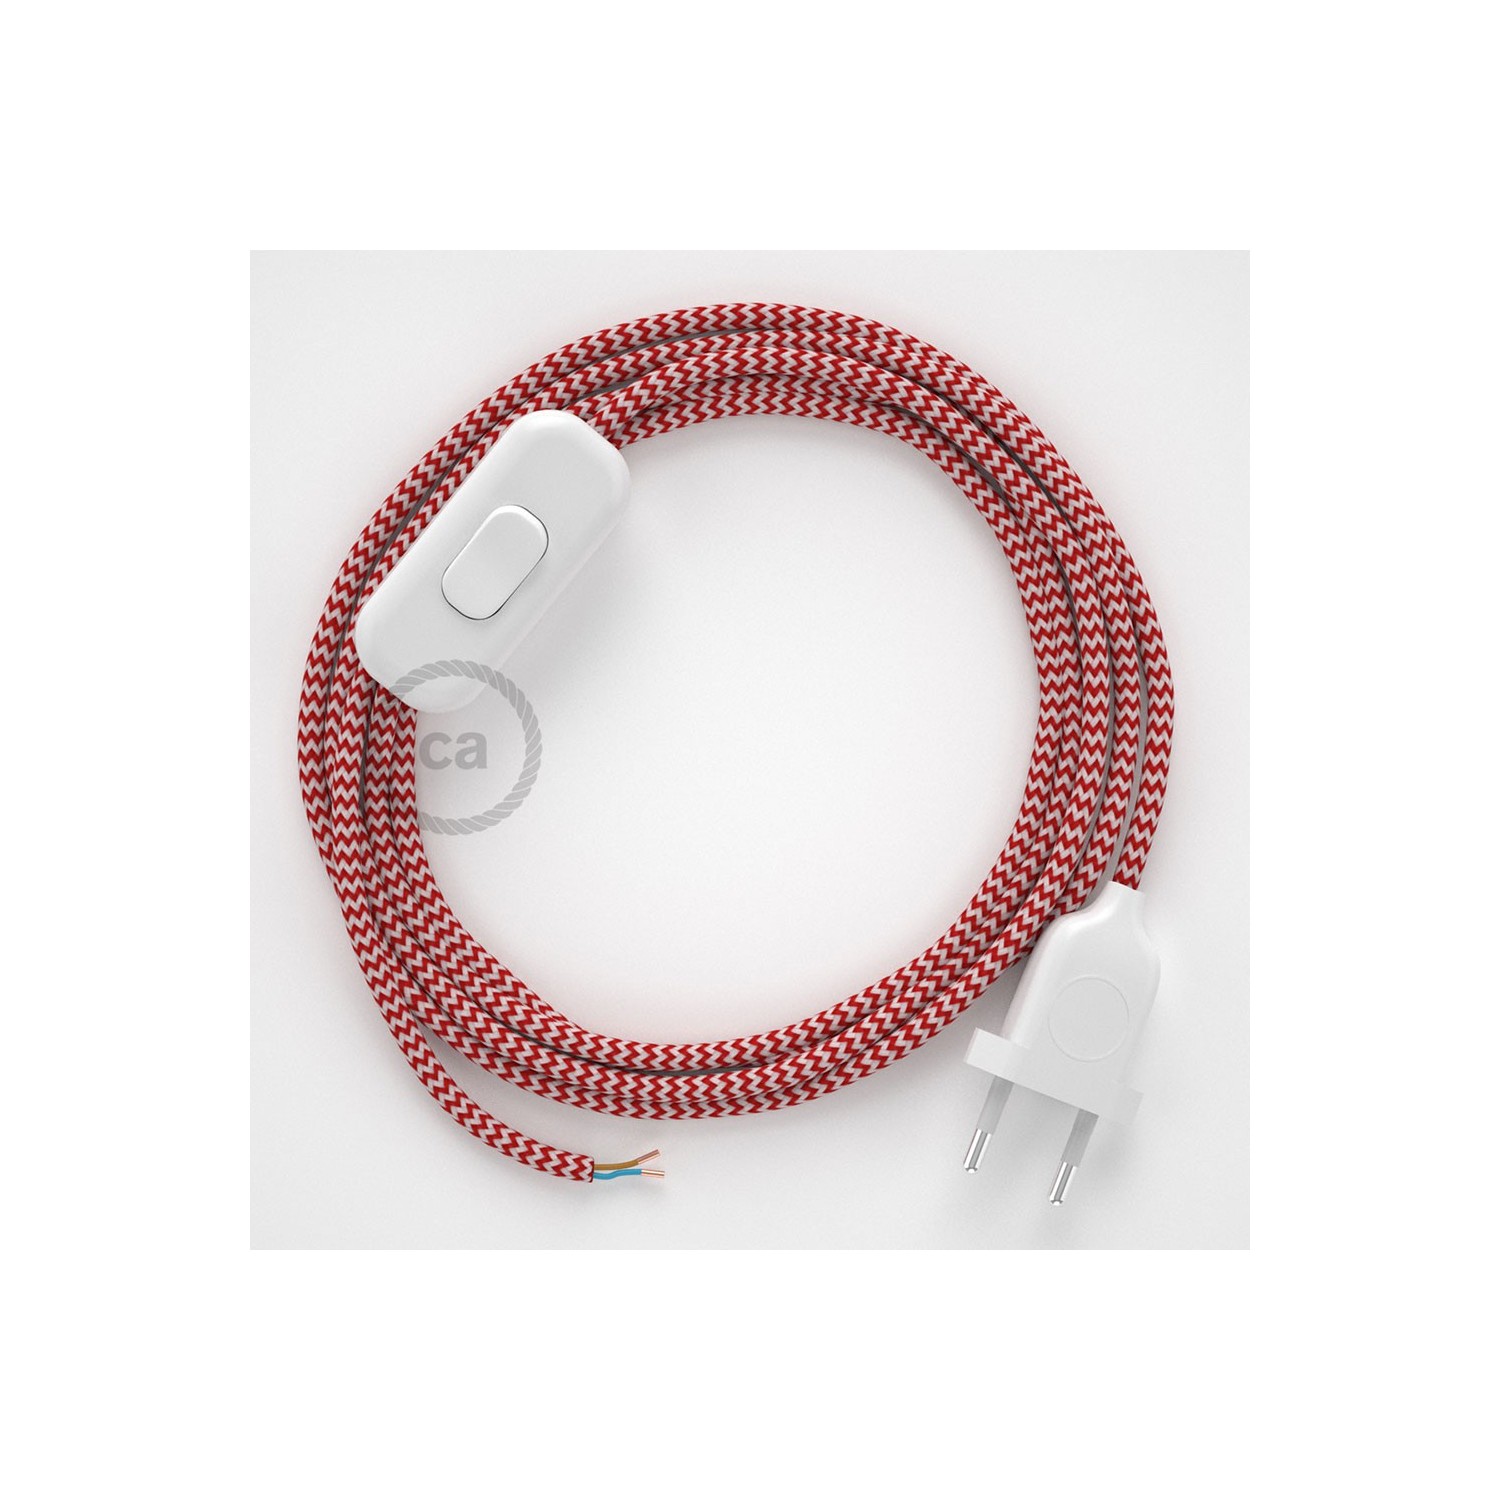 Lamp wiring, RZ09 Red ZigZag Rayon 1,80 m. Choose the colour of the switch and plug.